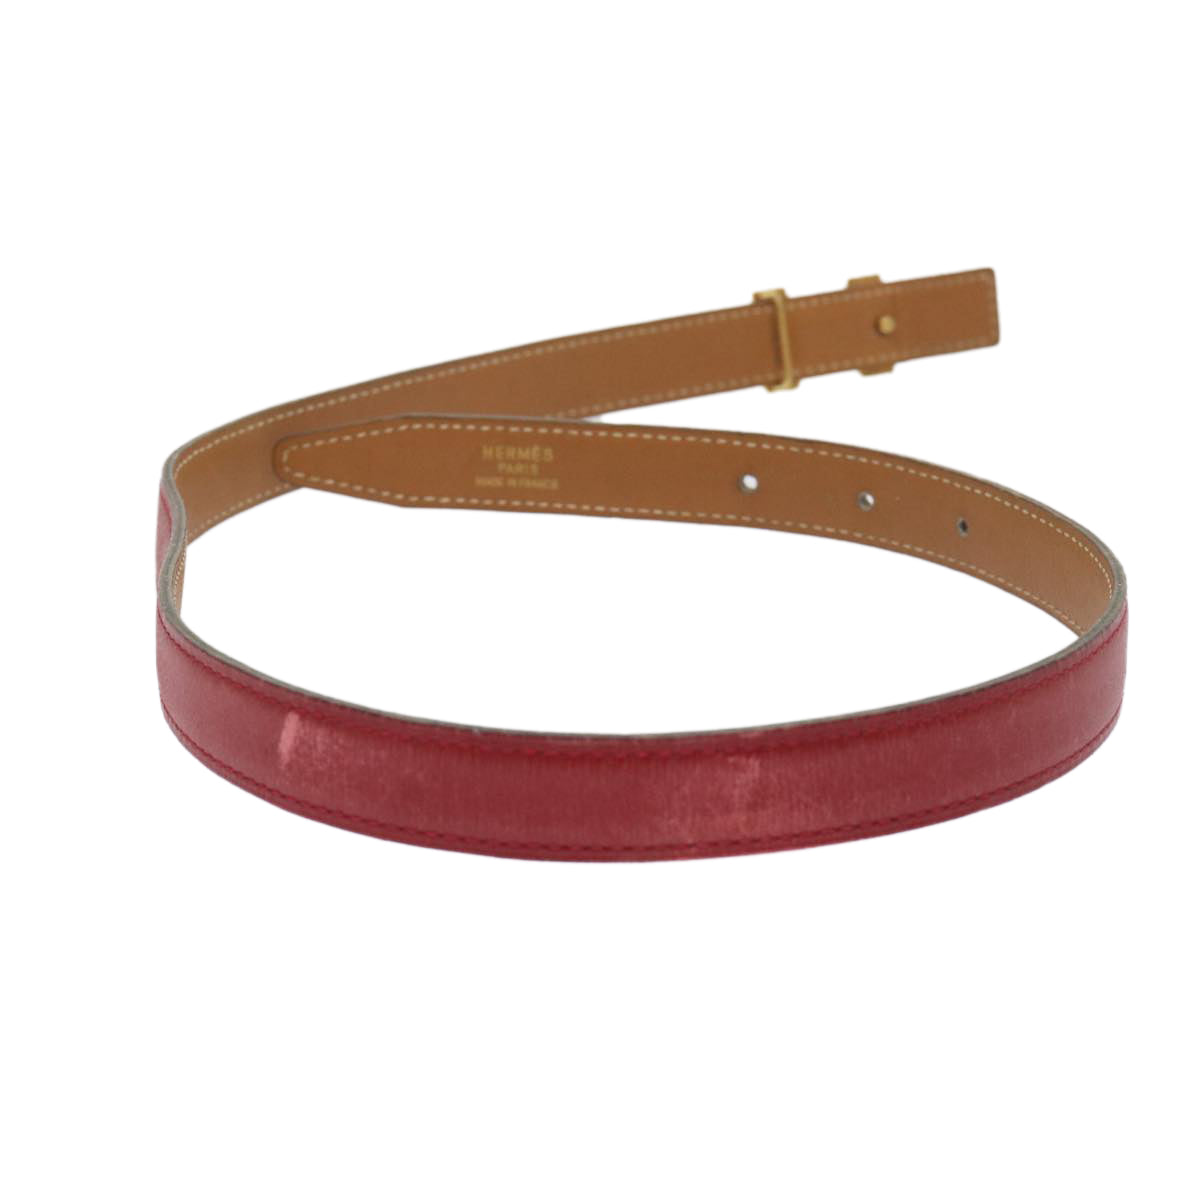 HERMES Belt Leather 29.1"" Red Auth am4718 - 0